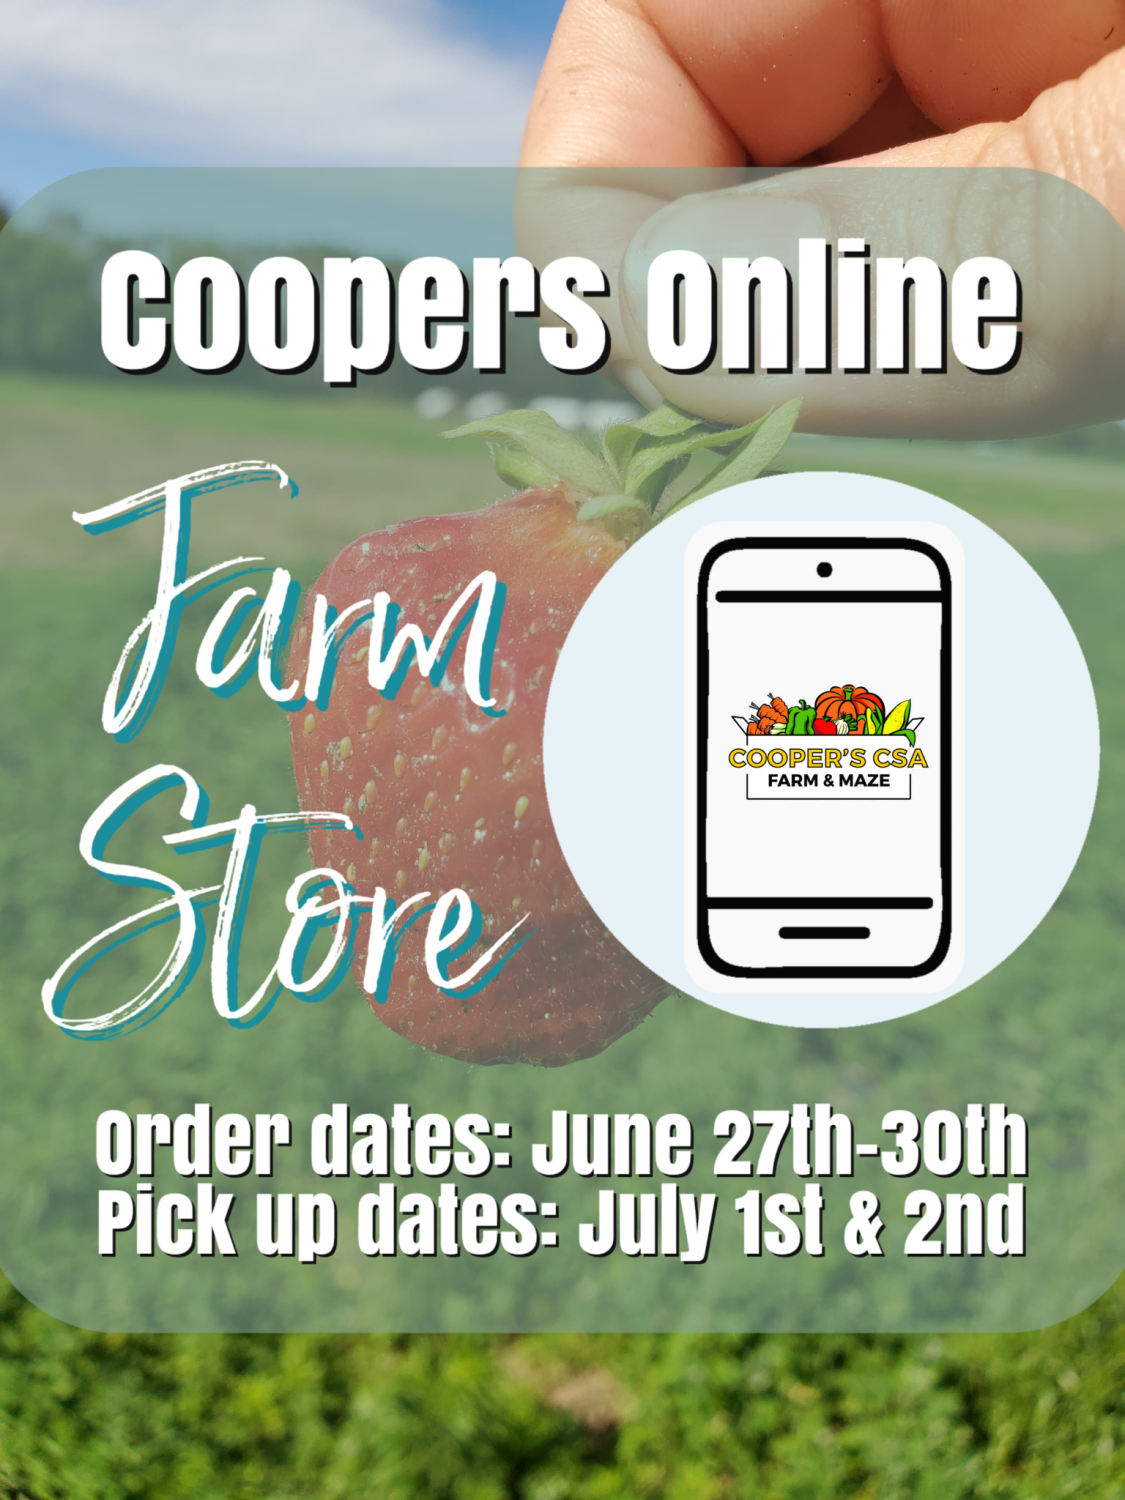 Previous Happening: Coopers Online Farm Stand- Order week June 27th-July 2nd